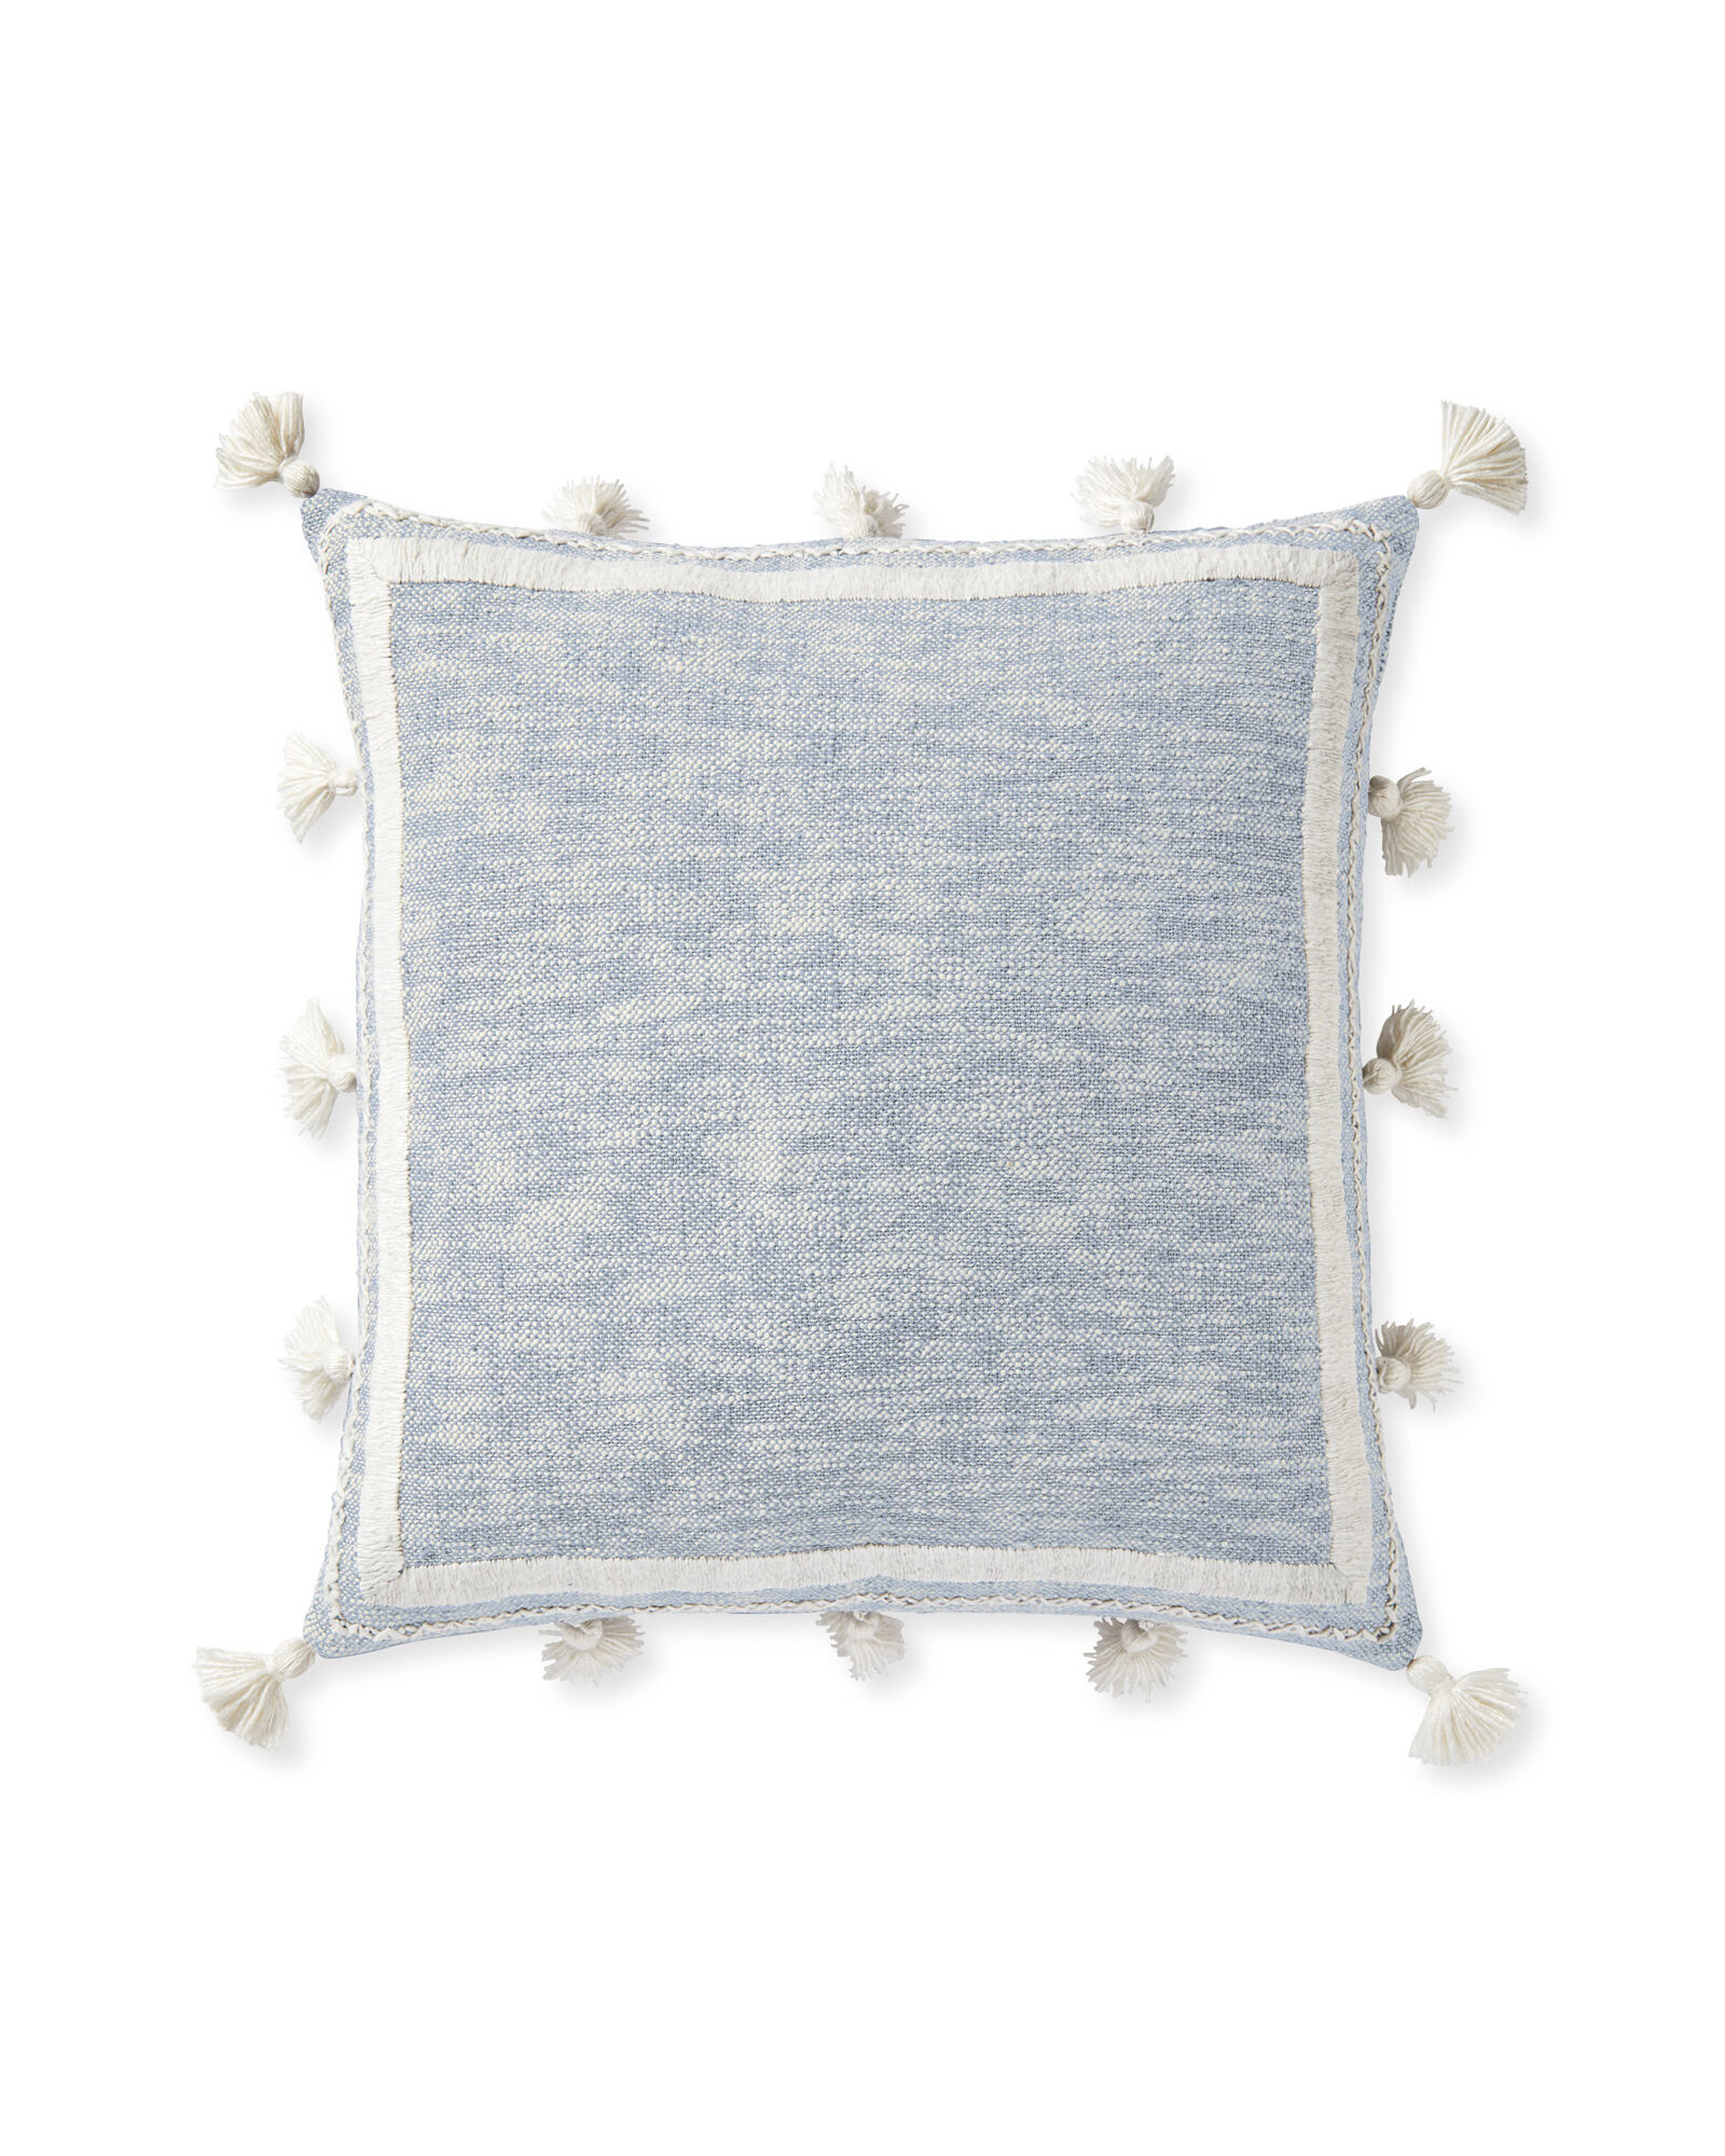 Tahoma Pillow Cover - Serena and Lily